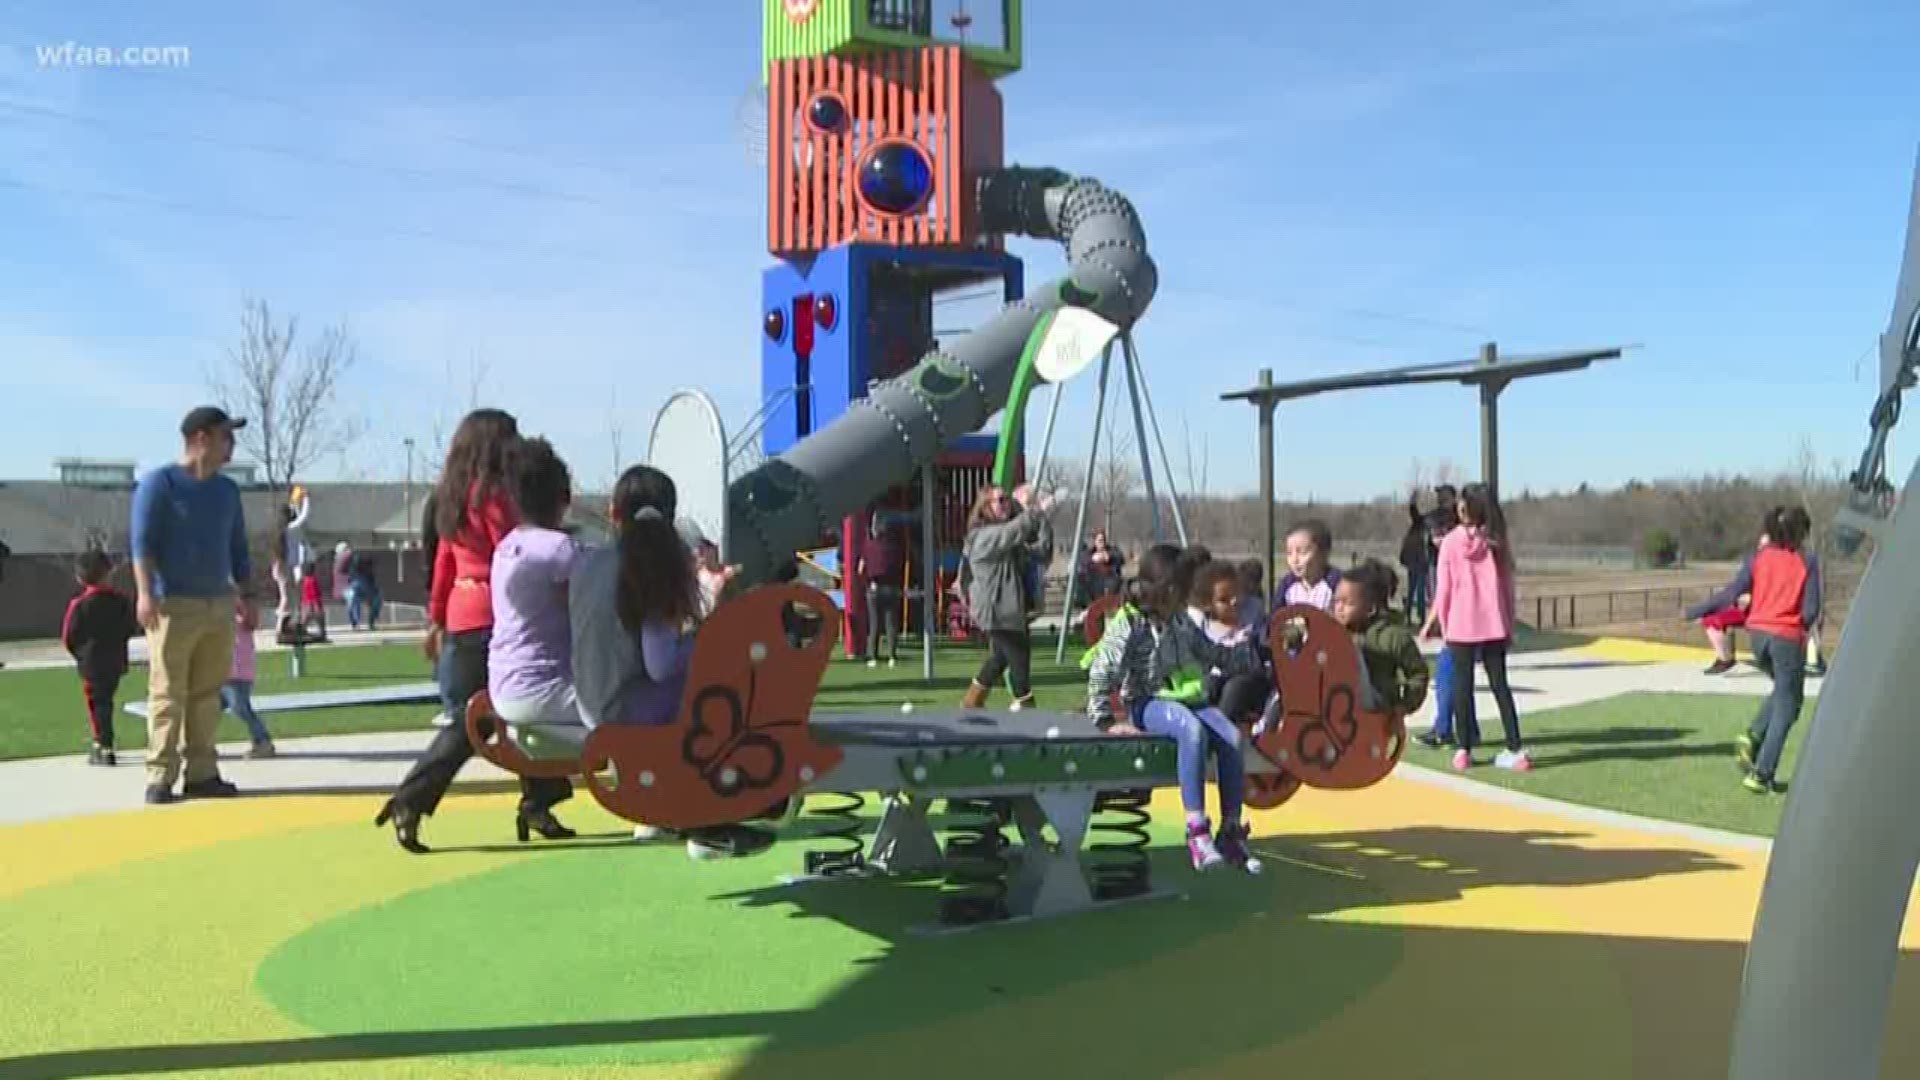 A new playground just opened in Grand Prairie and it's nothing like anything else in Texas.